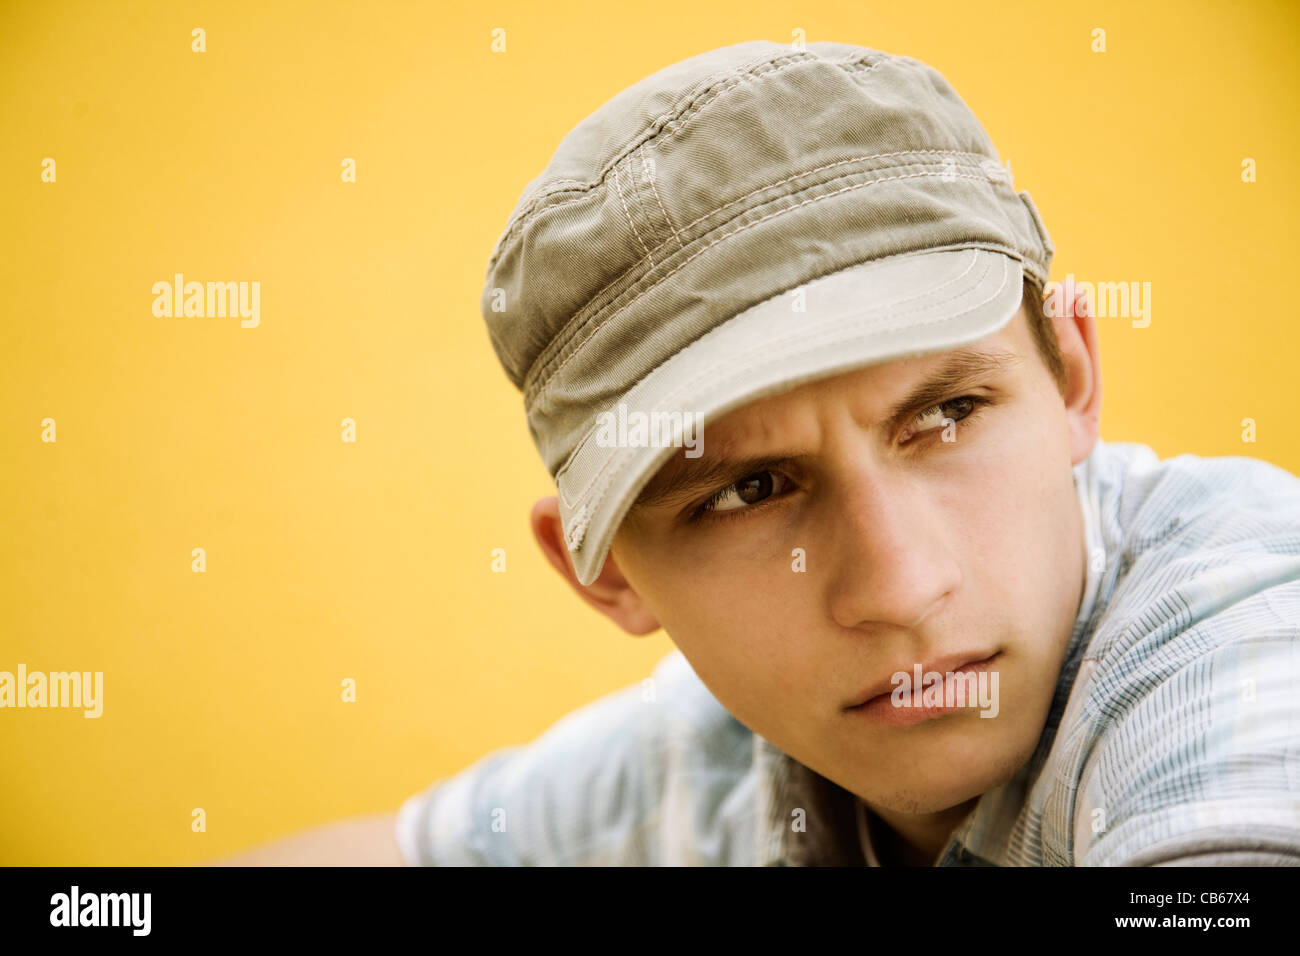 young man in problems Stock Photo